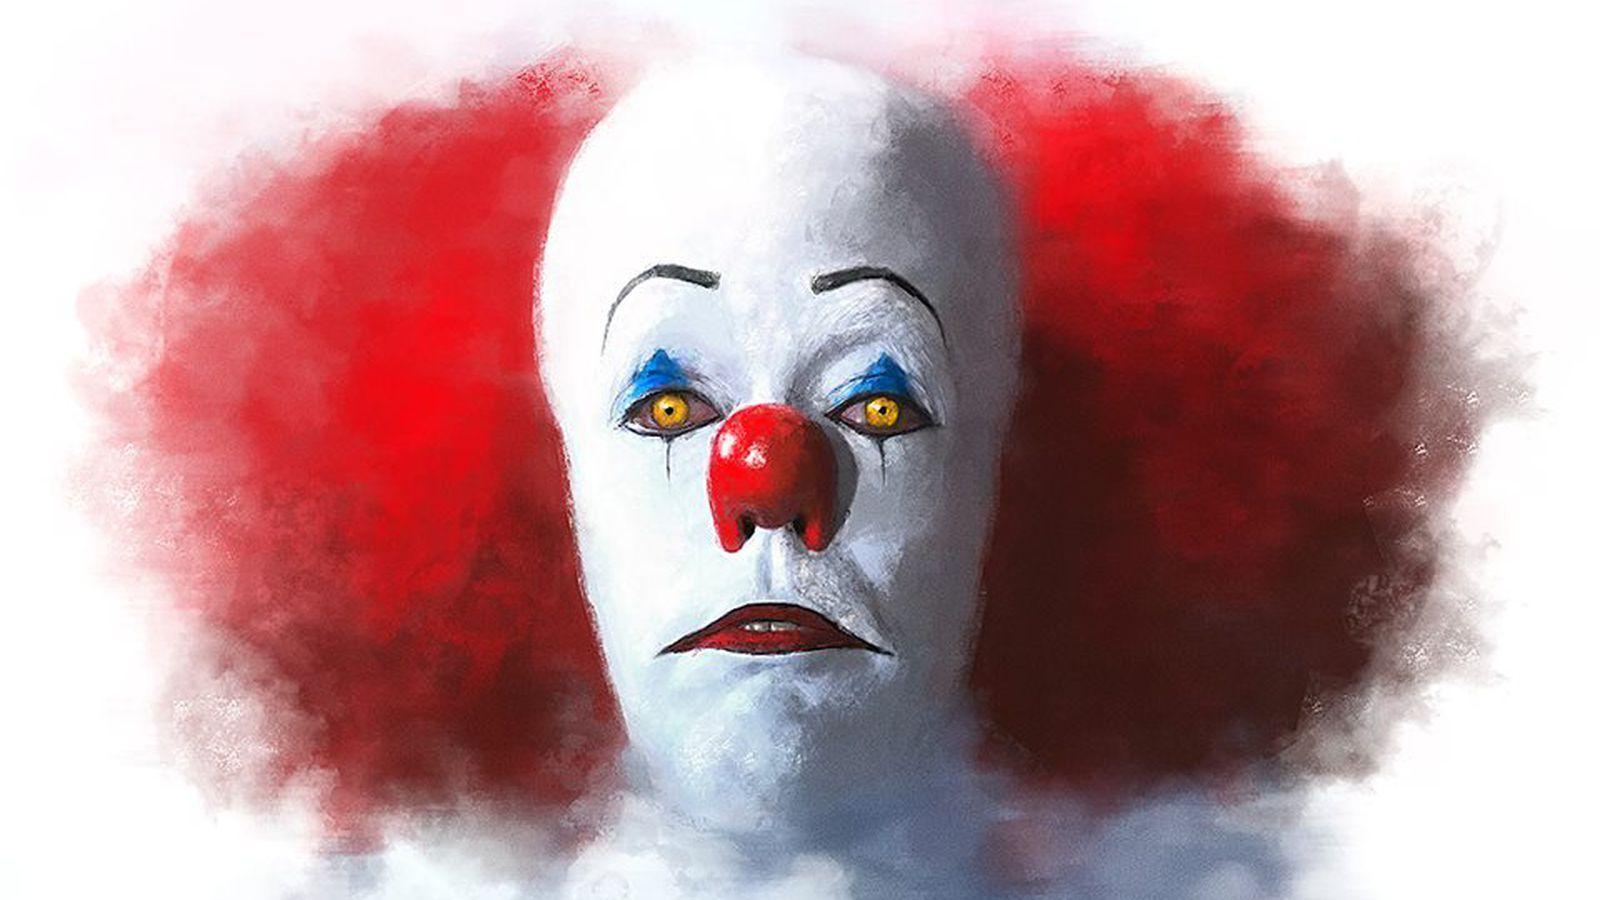 Stephen King's It will hit theaters on September 18th, 2017